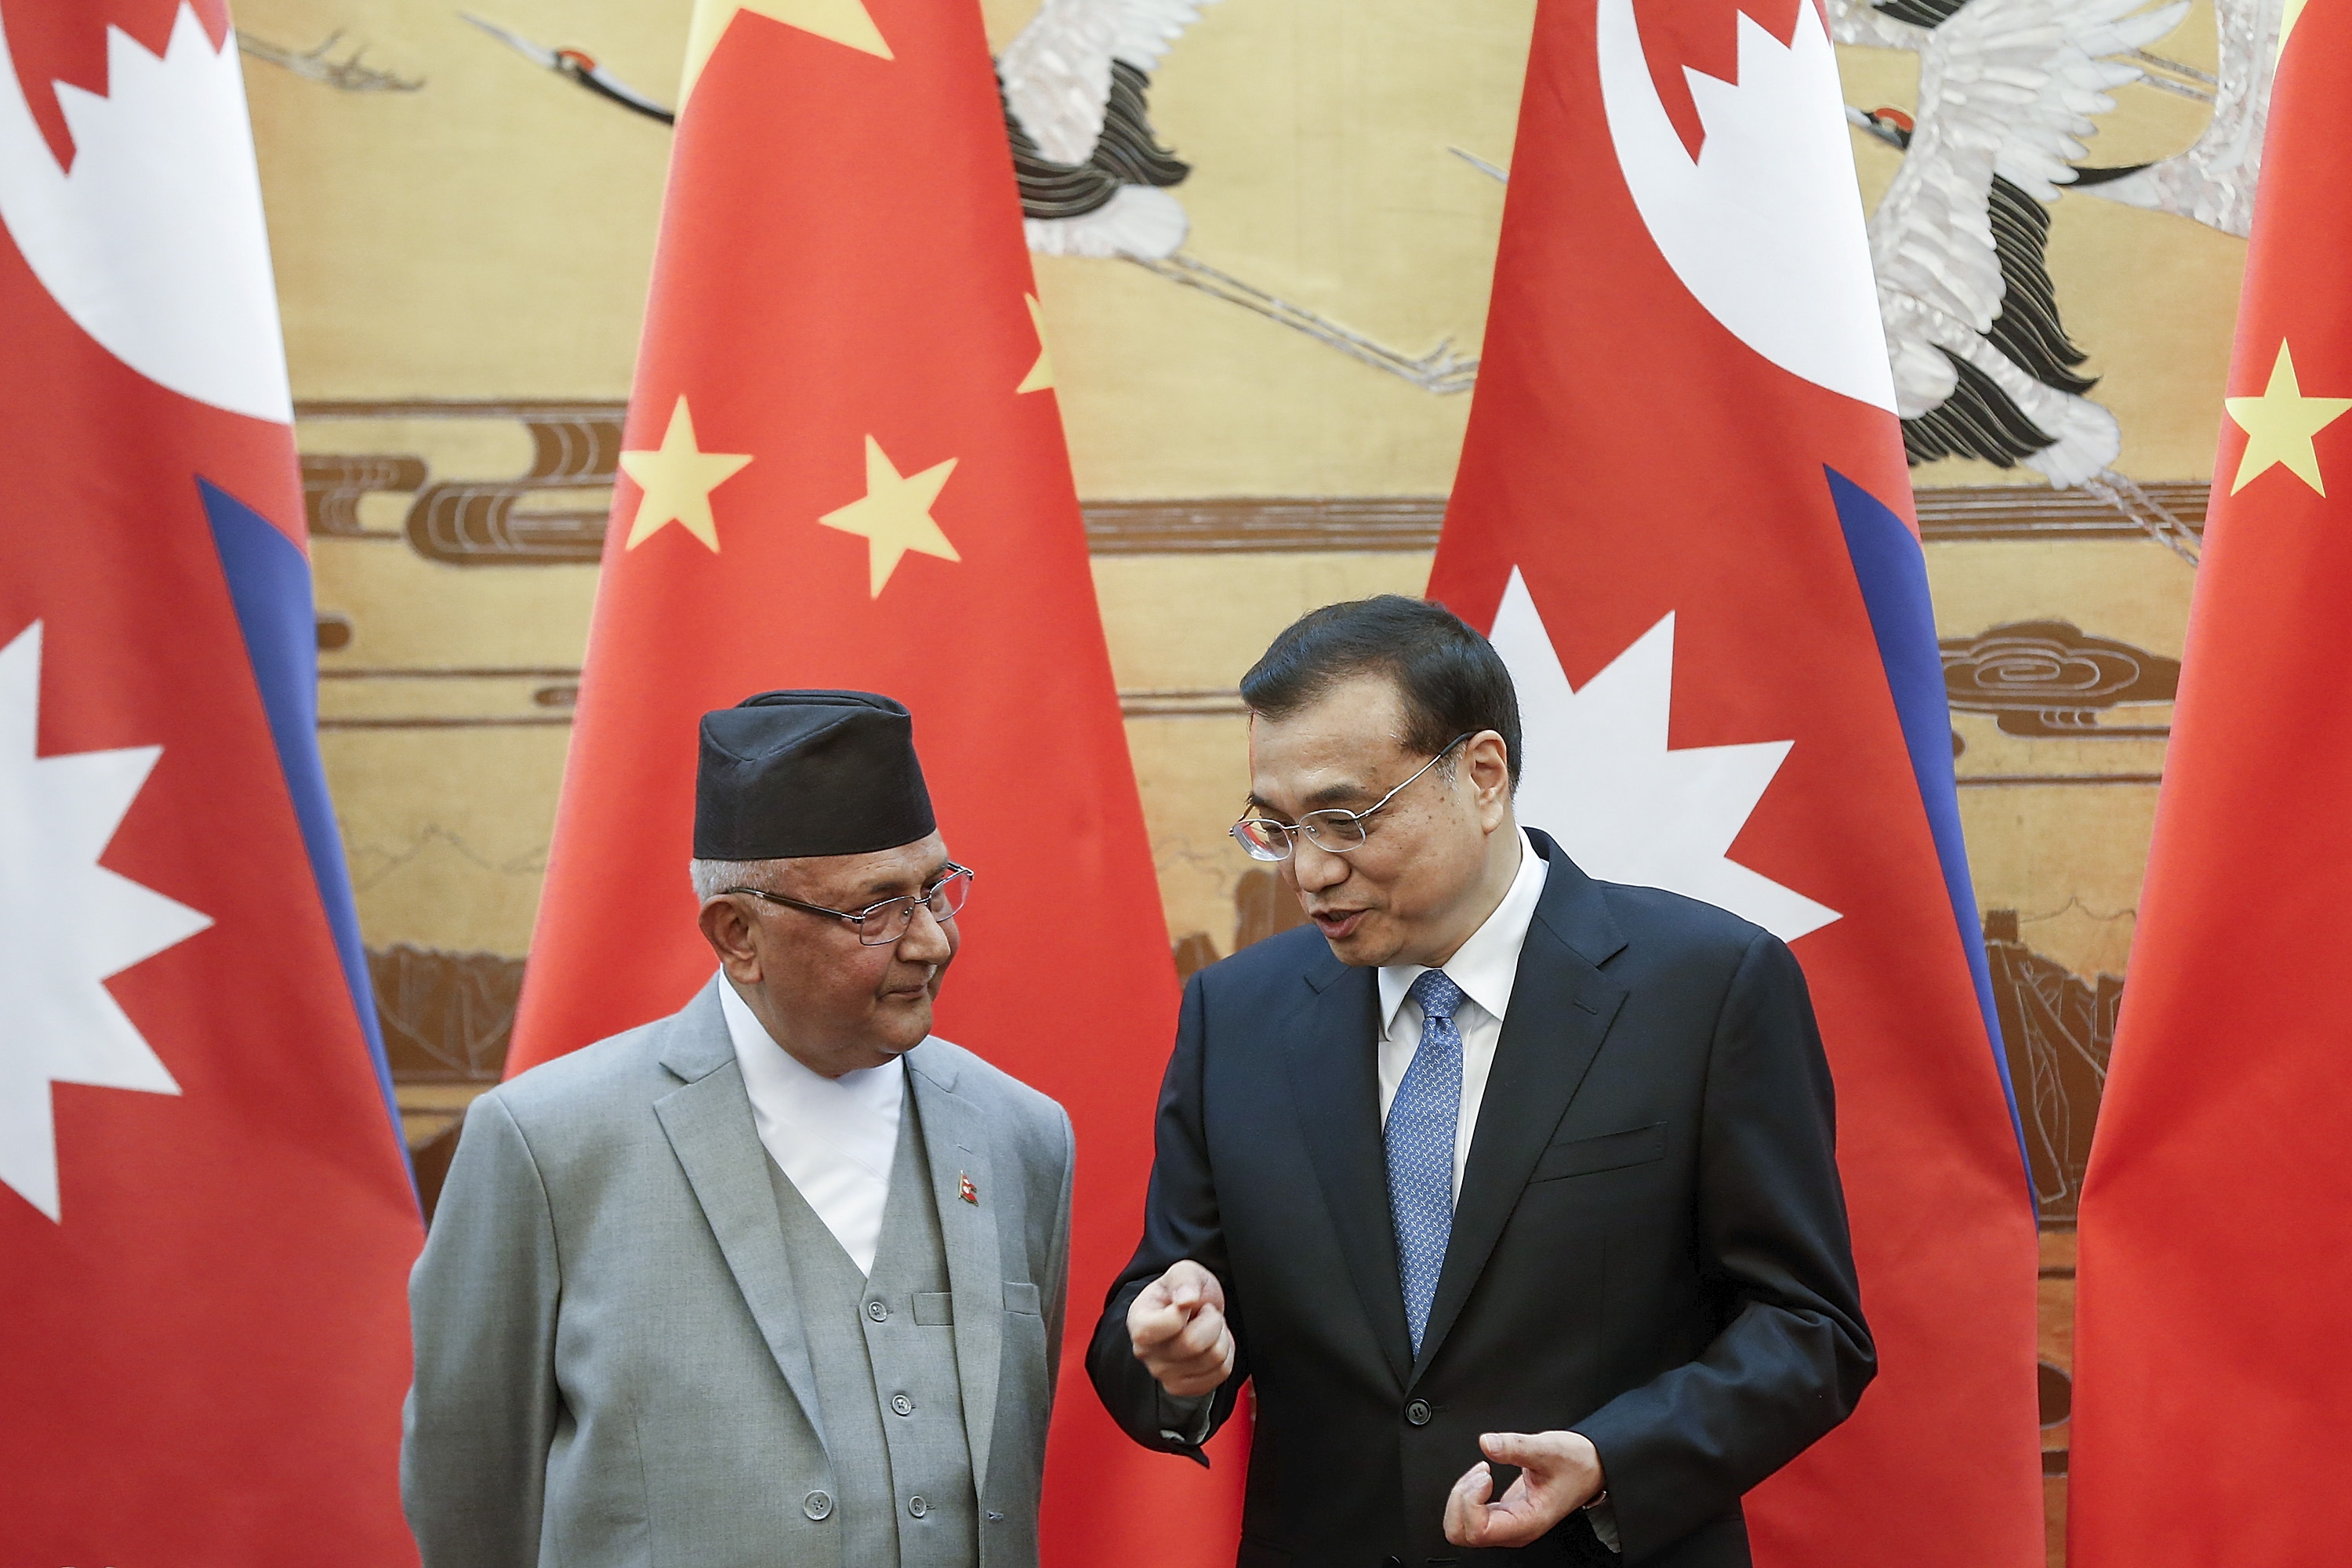 Chinese Premier Li Keqiang talks to Nepal Prime Minister Khadga Prasad Sharma Oli during a signing ceremony at the Great Hall of the People in Beijing